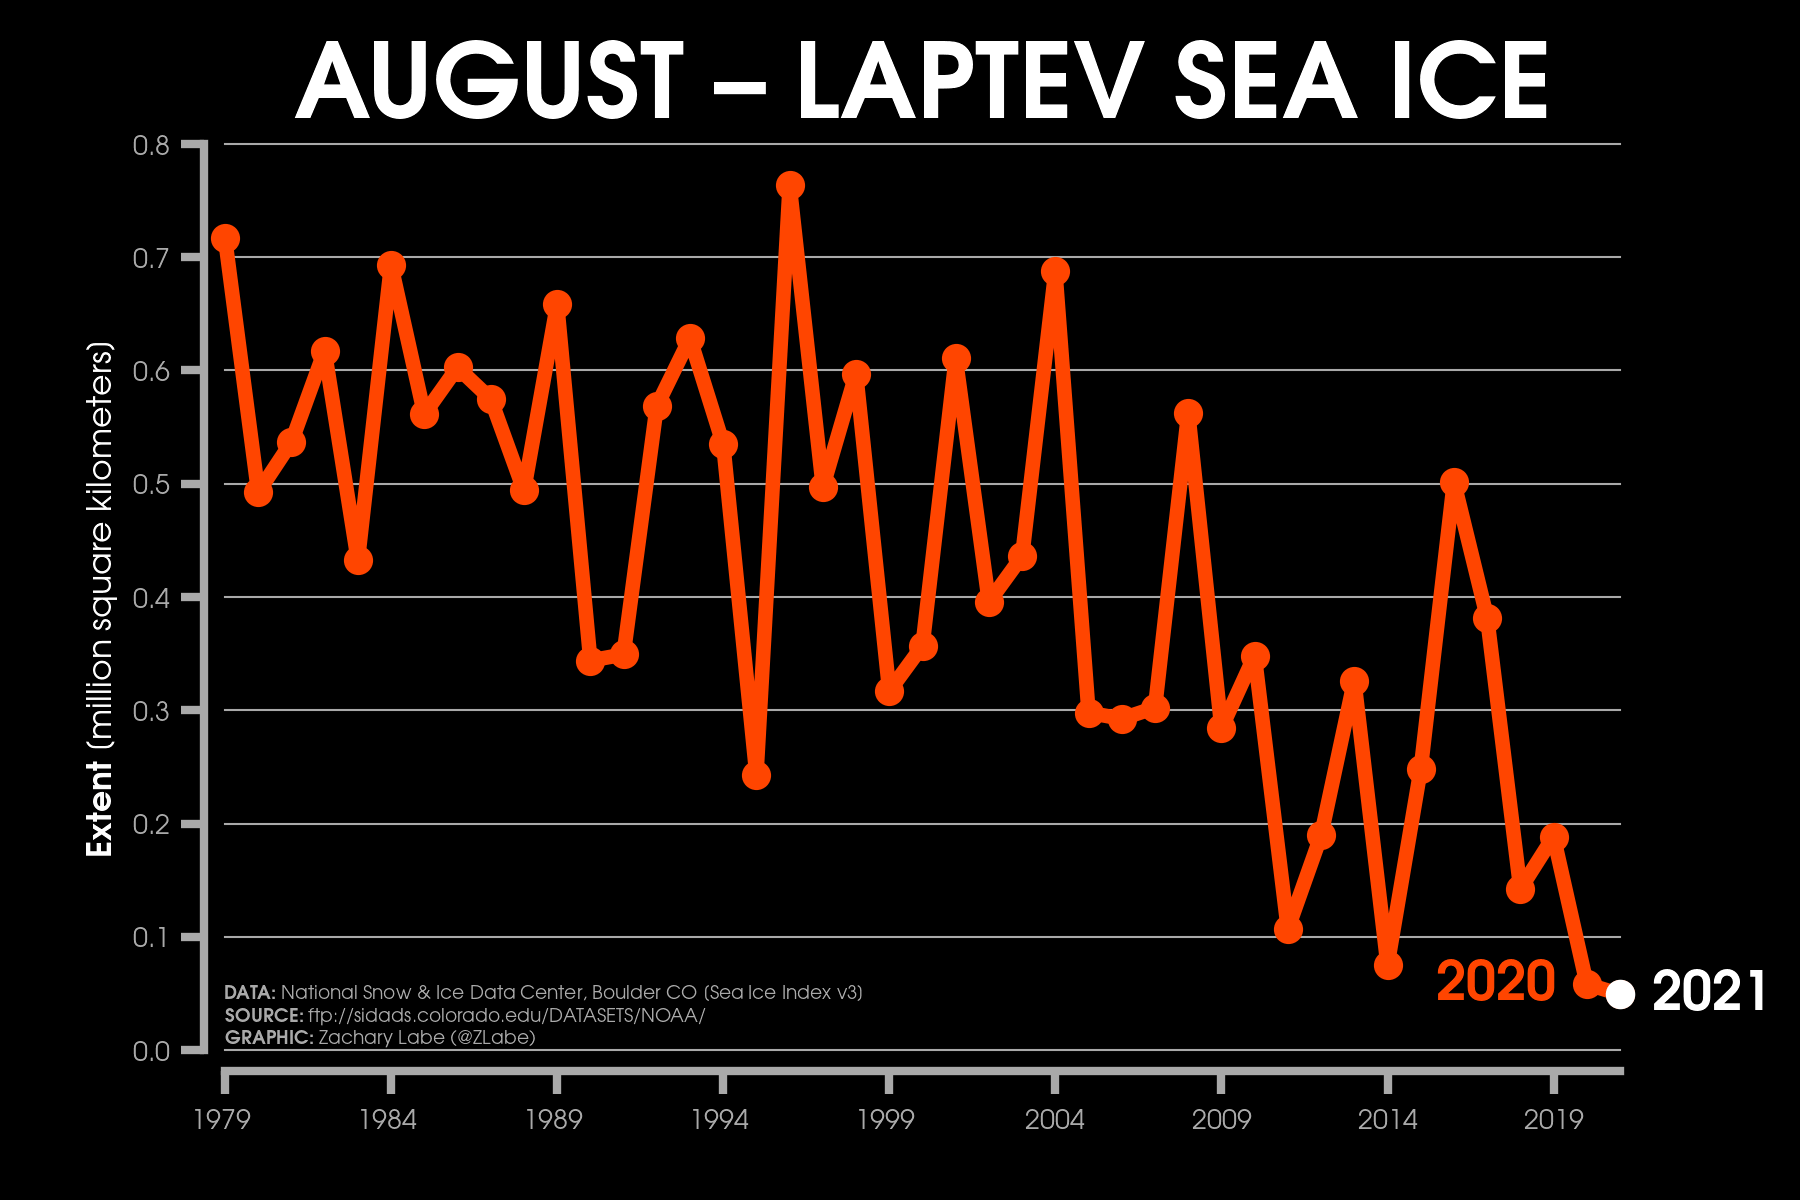 august-laptev-sea-ice-extent-by-years